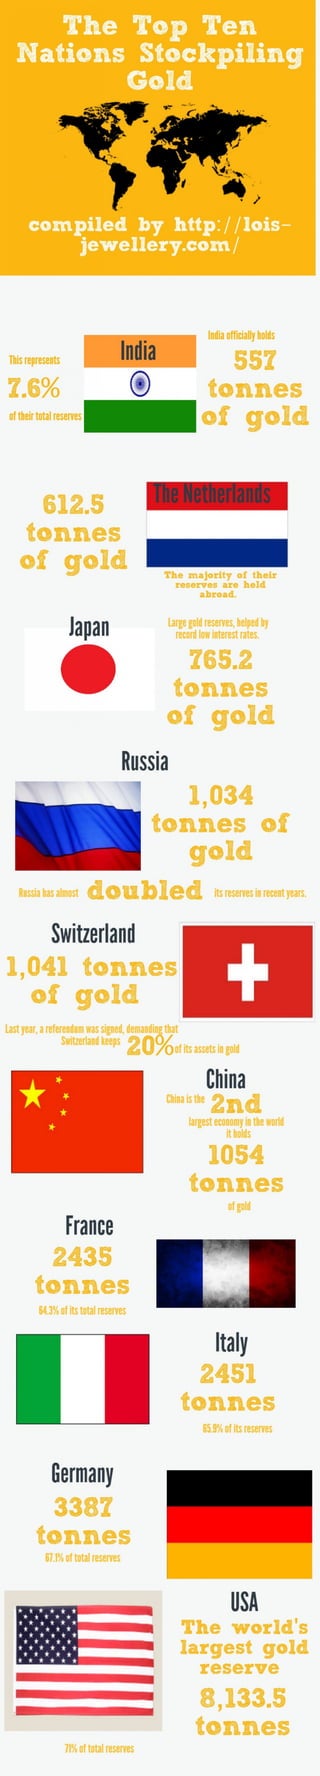 The Top 10 Nations Stockpiling Gold